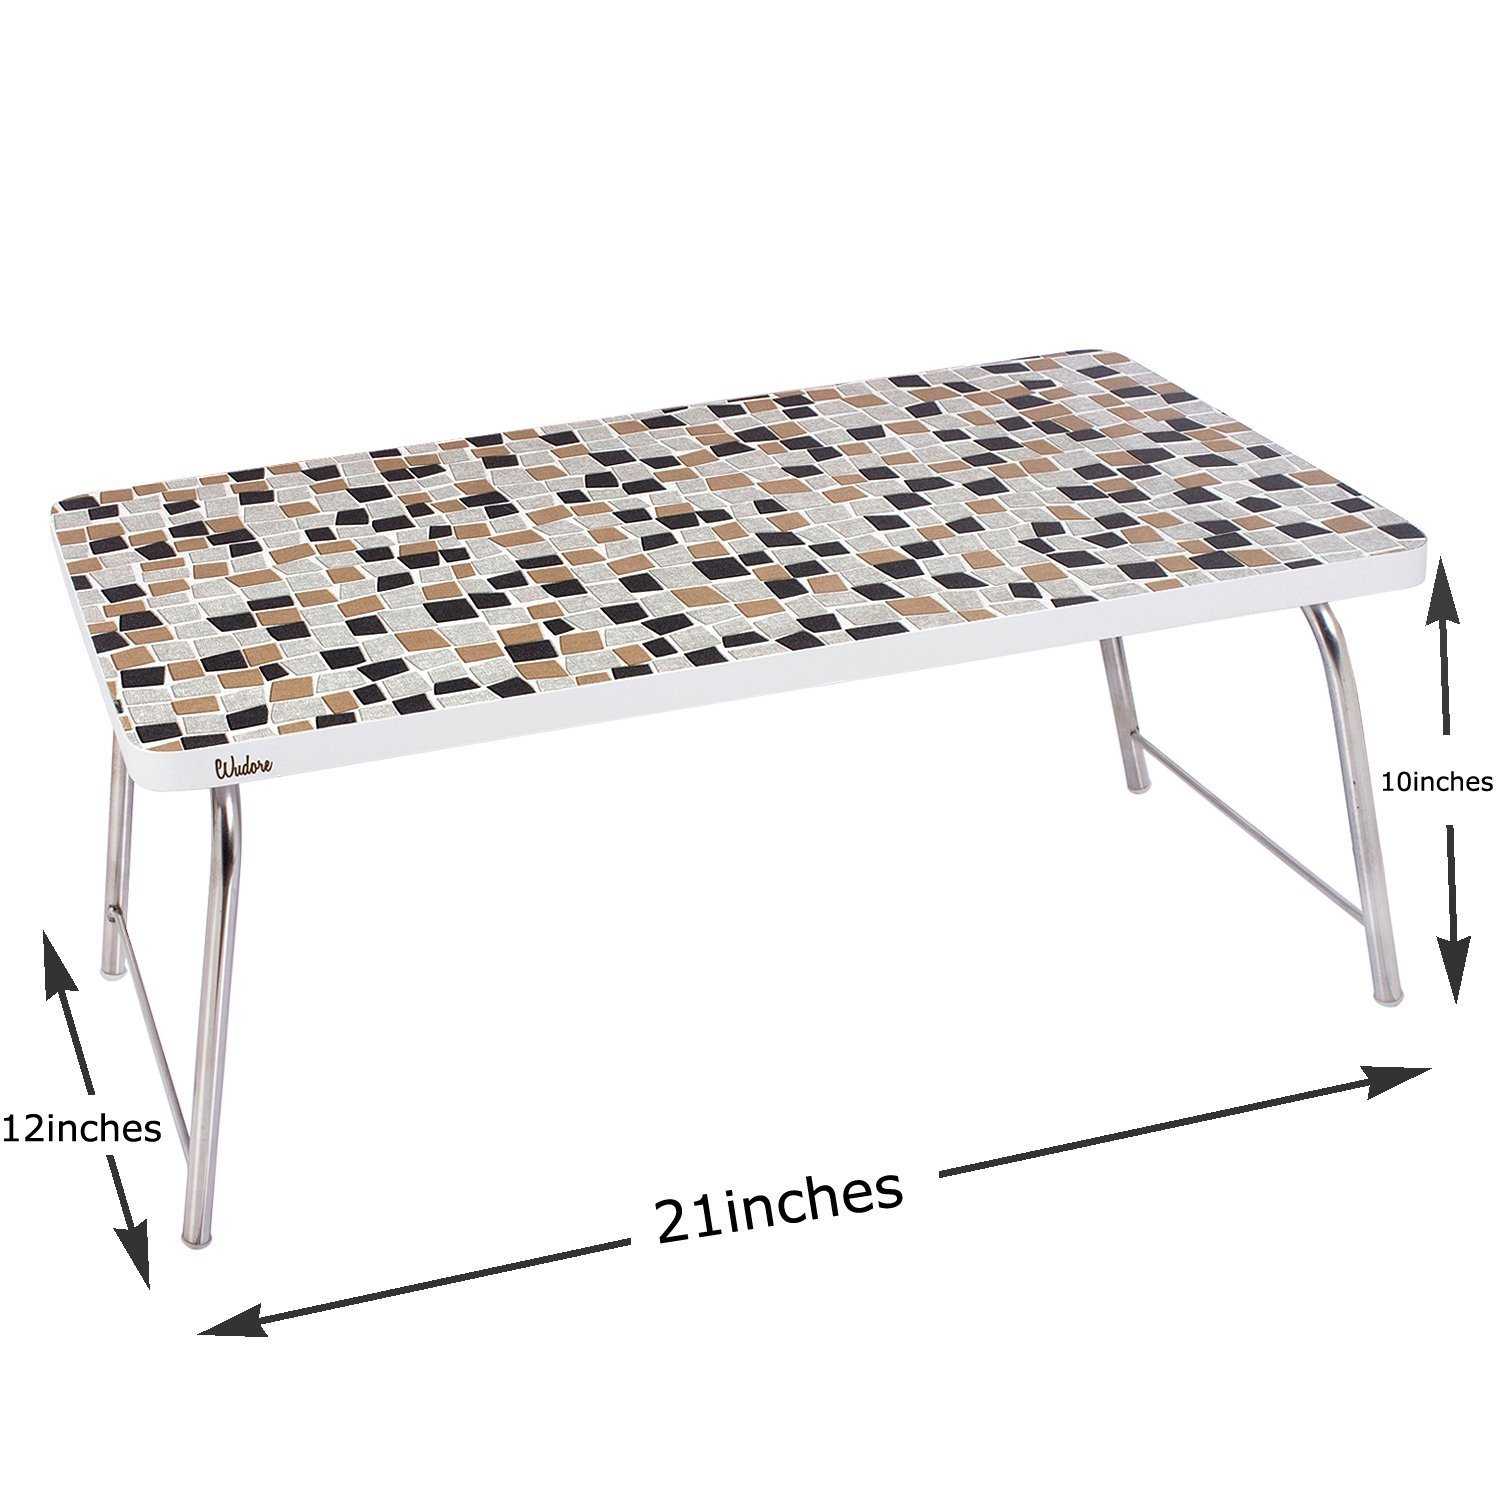 Laptop Table With Folding Steel Legs - Mosaic | Wudore